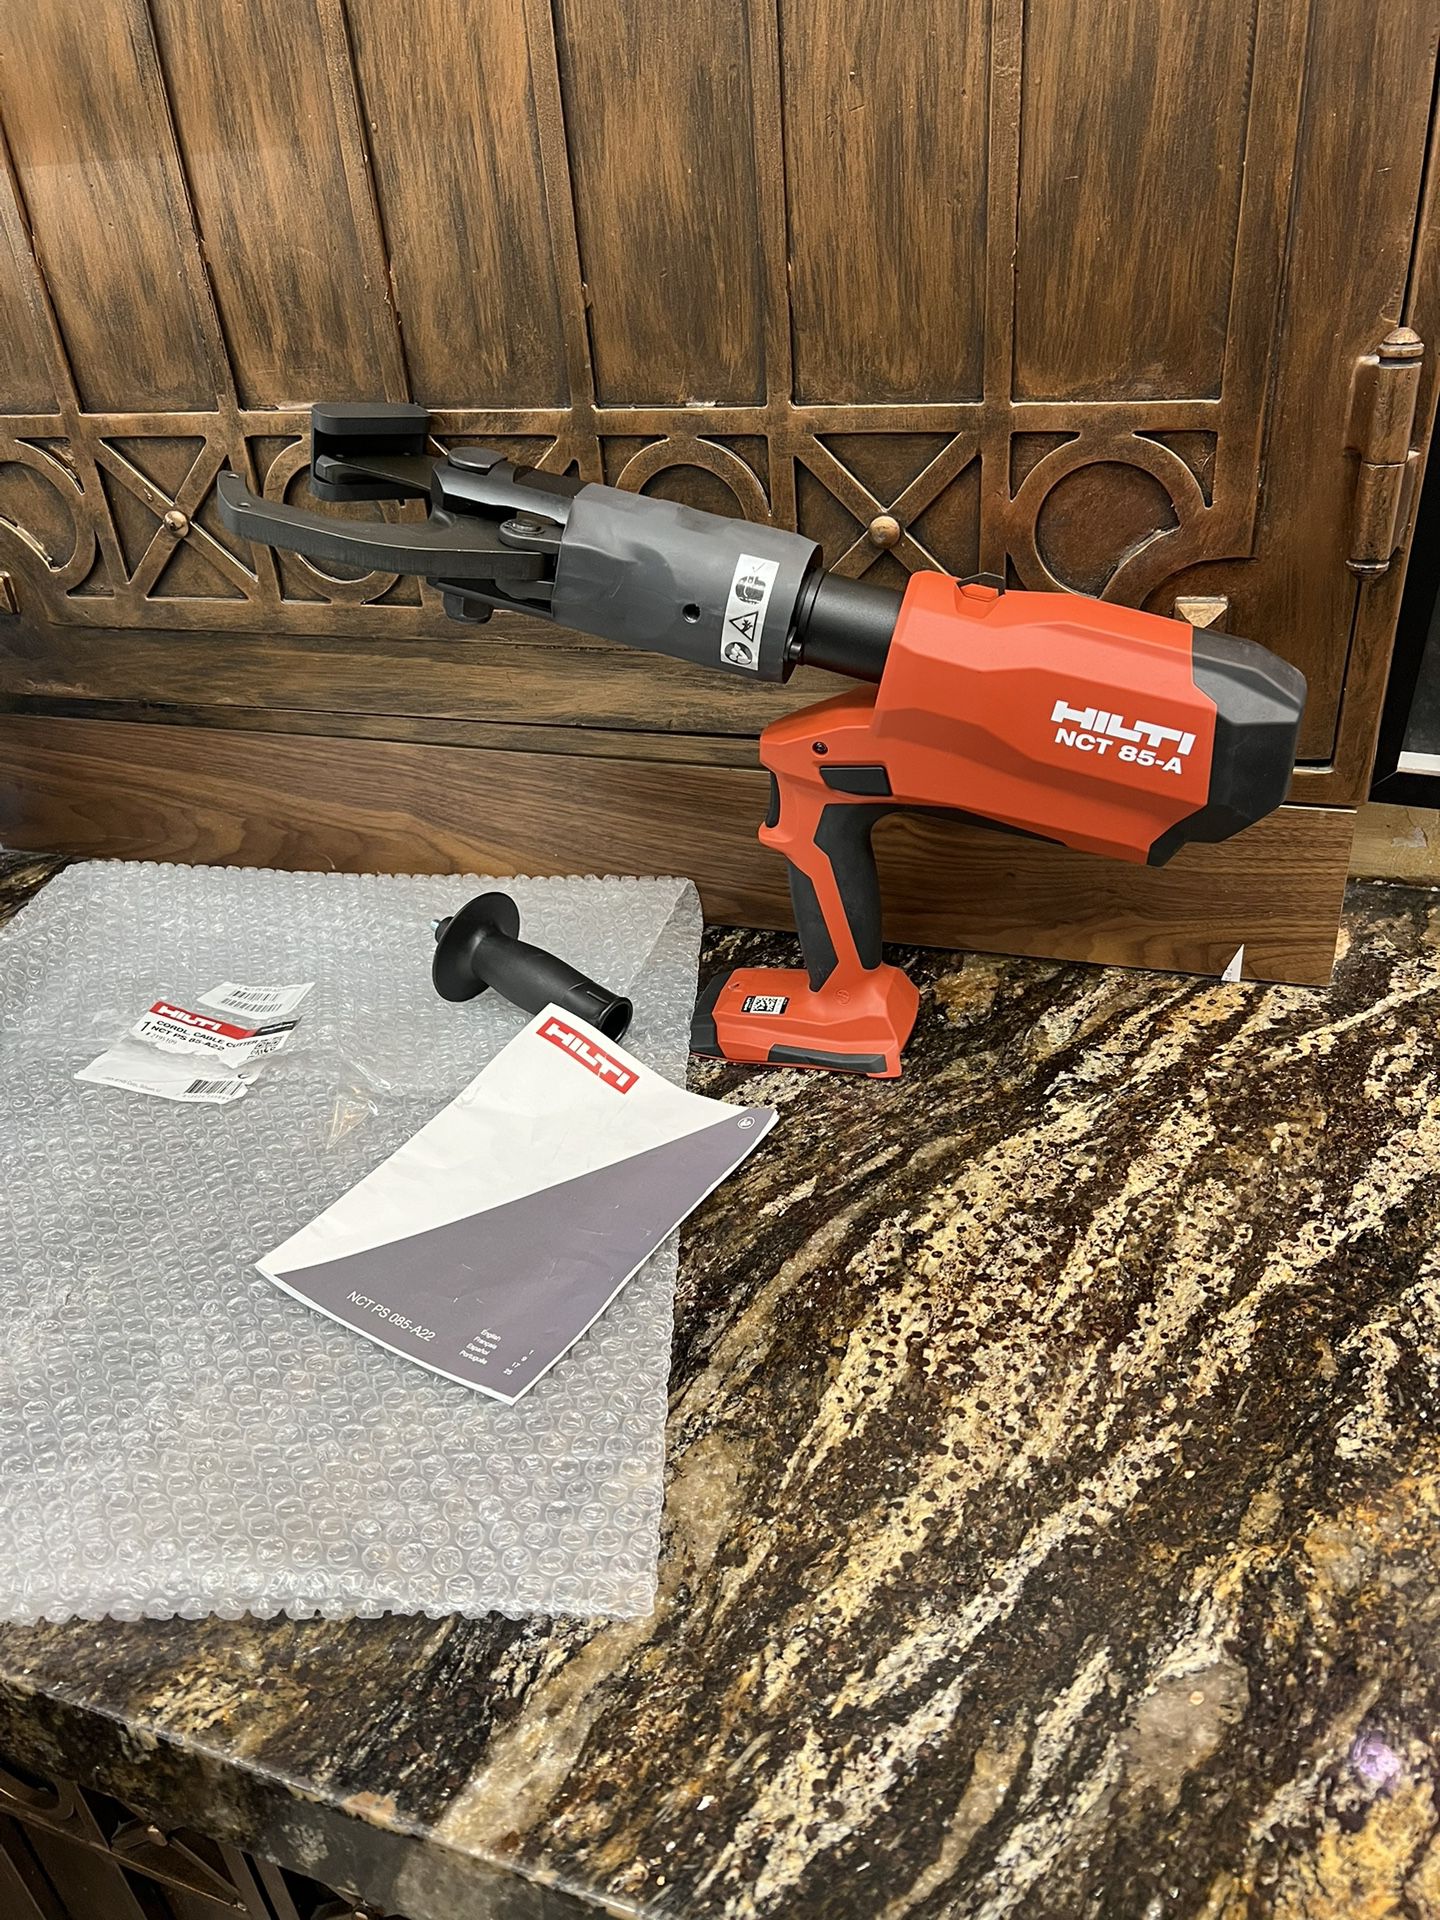 Hilti NCT 85-A Cu/Al cable cutter NEW!!,Hilti NCT 85-A Cable Cutter, Cordless pistol-grip copper and aluminum cable cutter,Hilti,Hilti Cable Cutter,